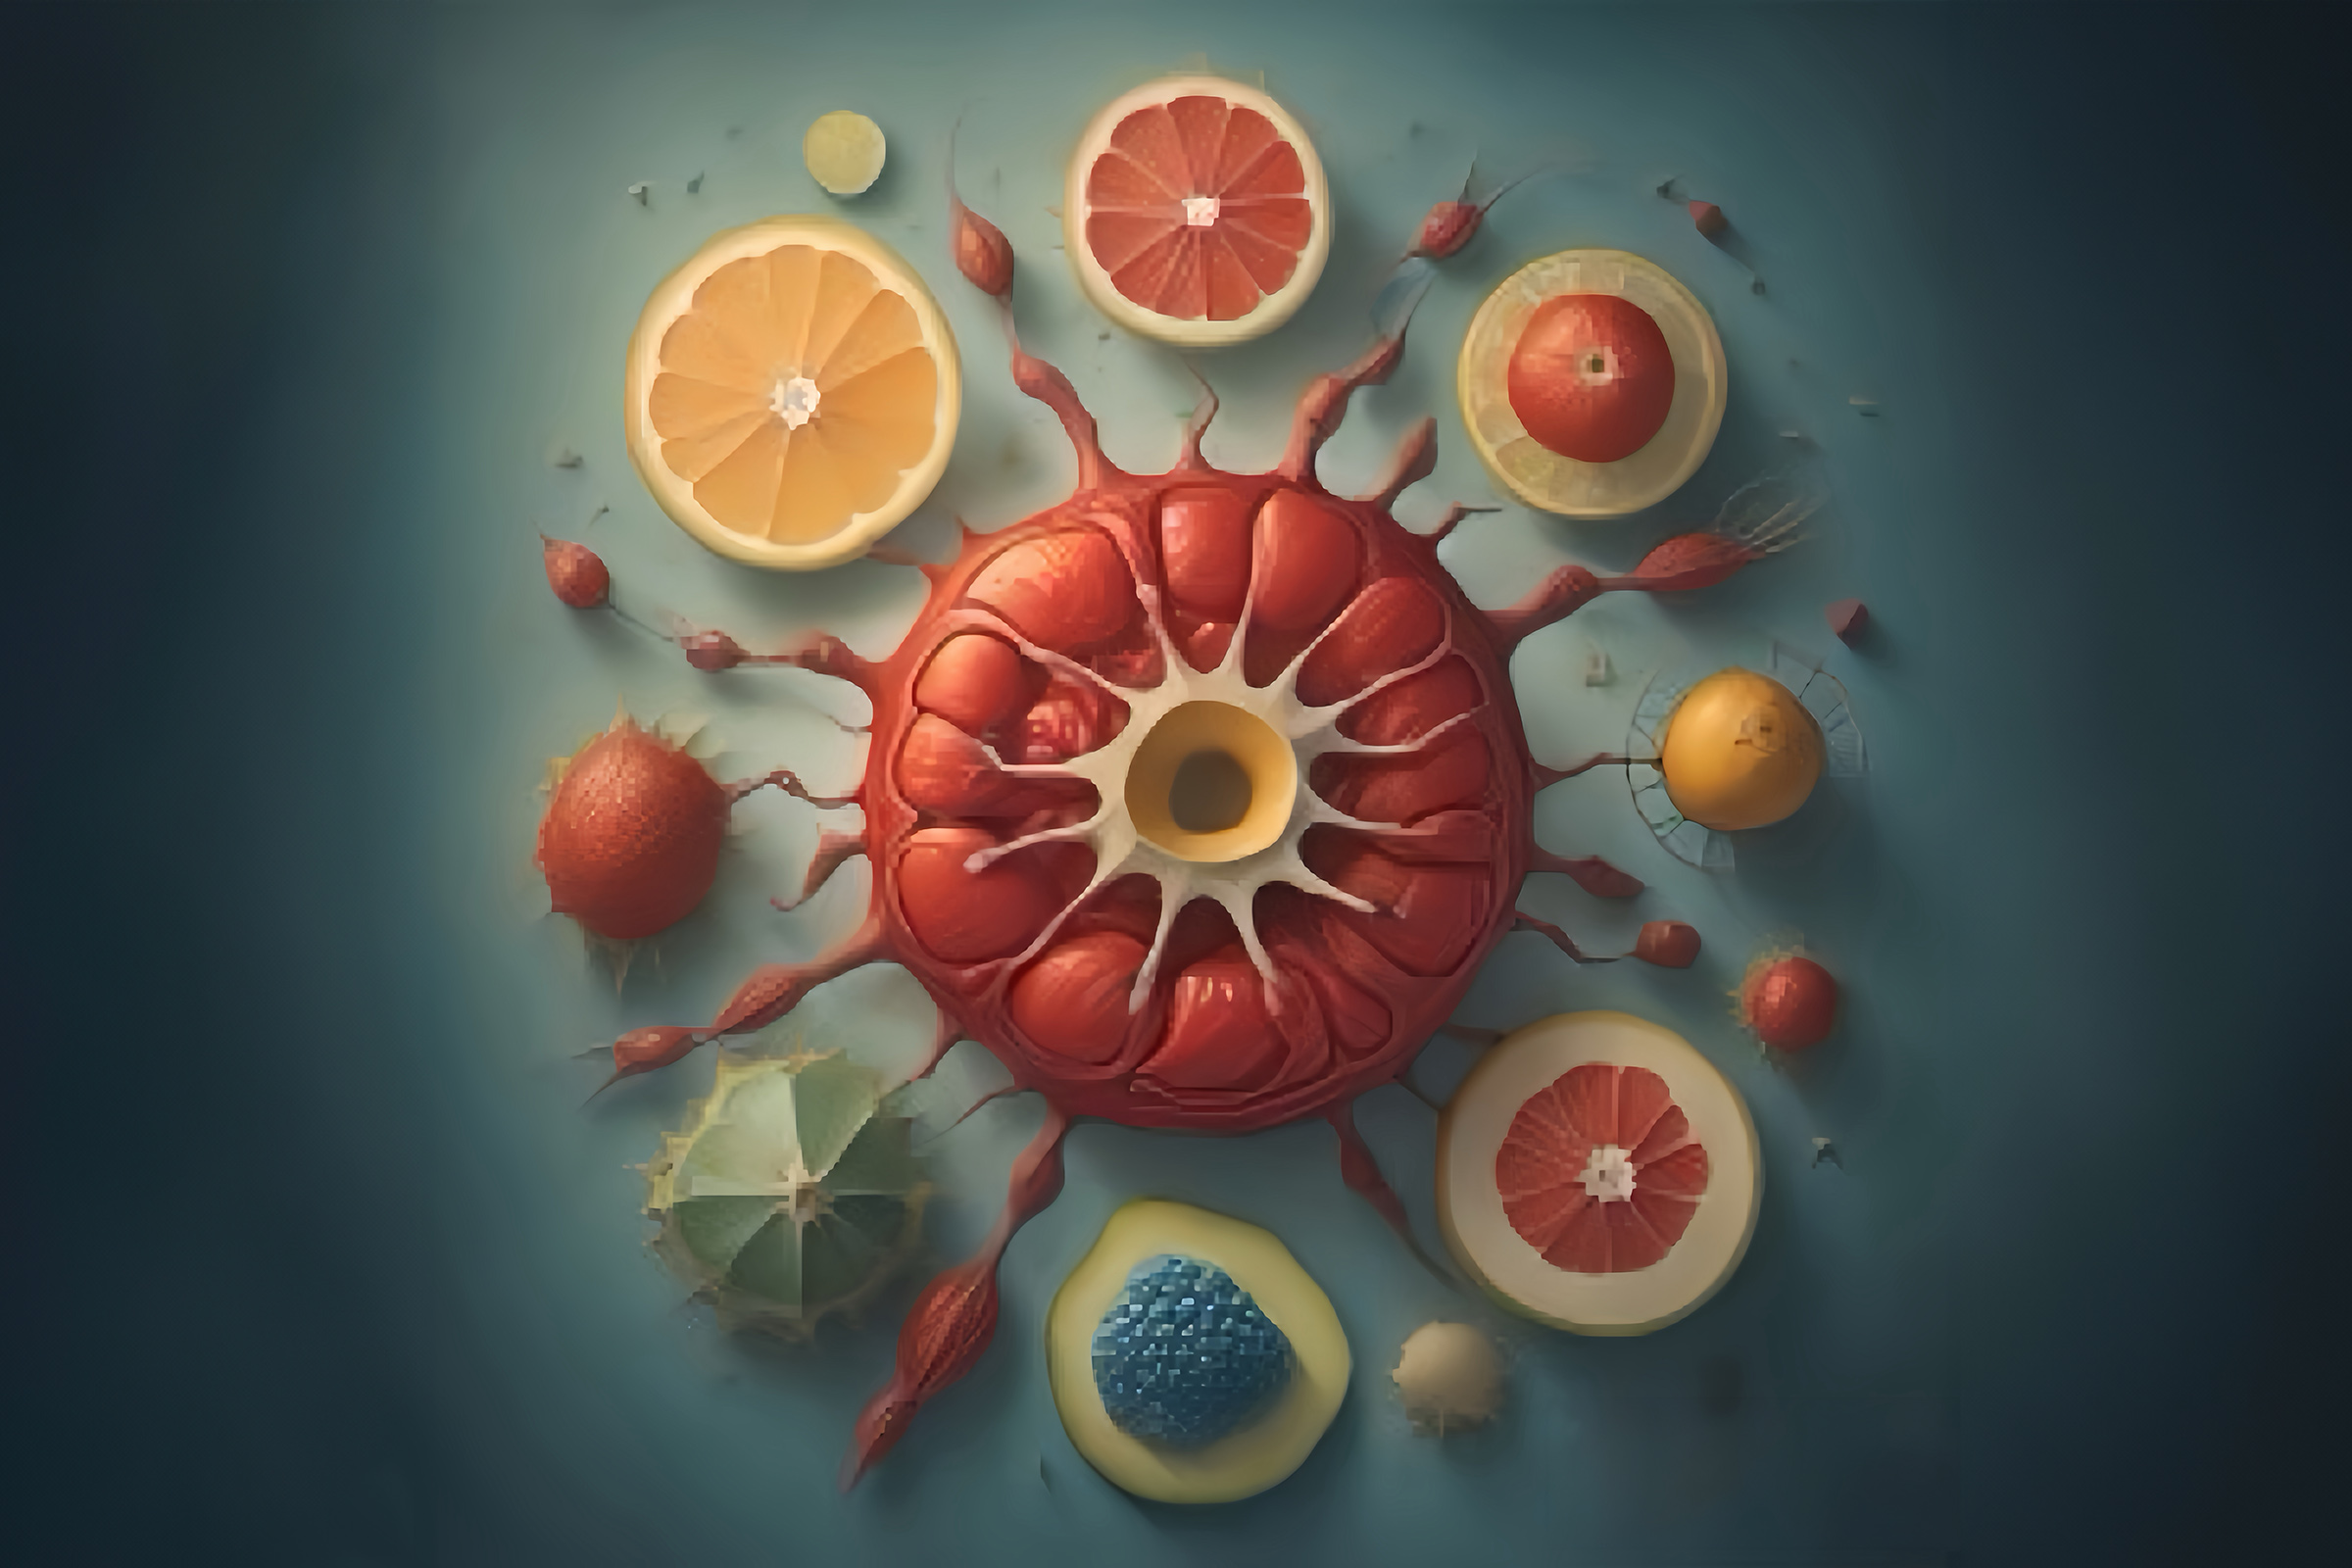 An artistic depiction of energy metabolism in cells